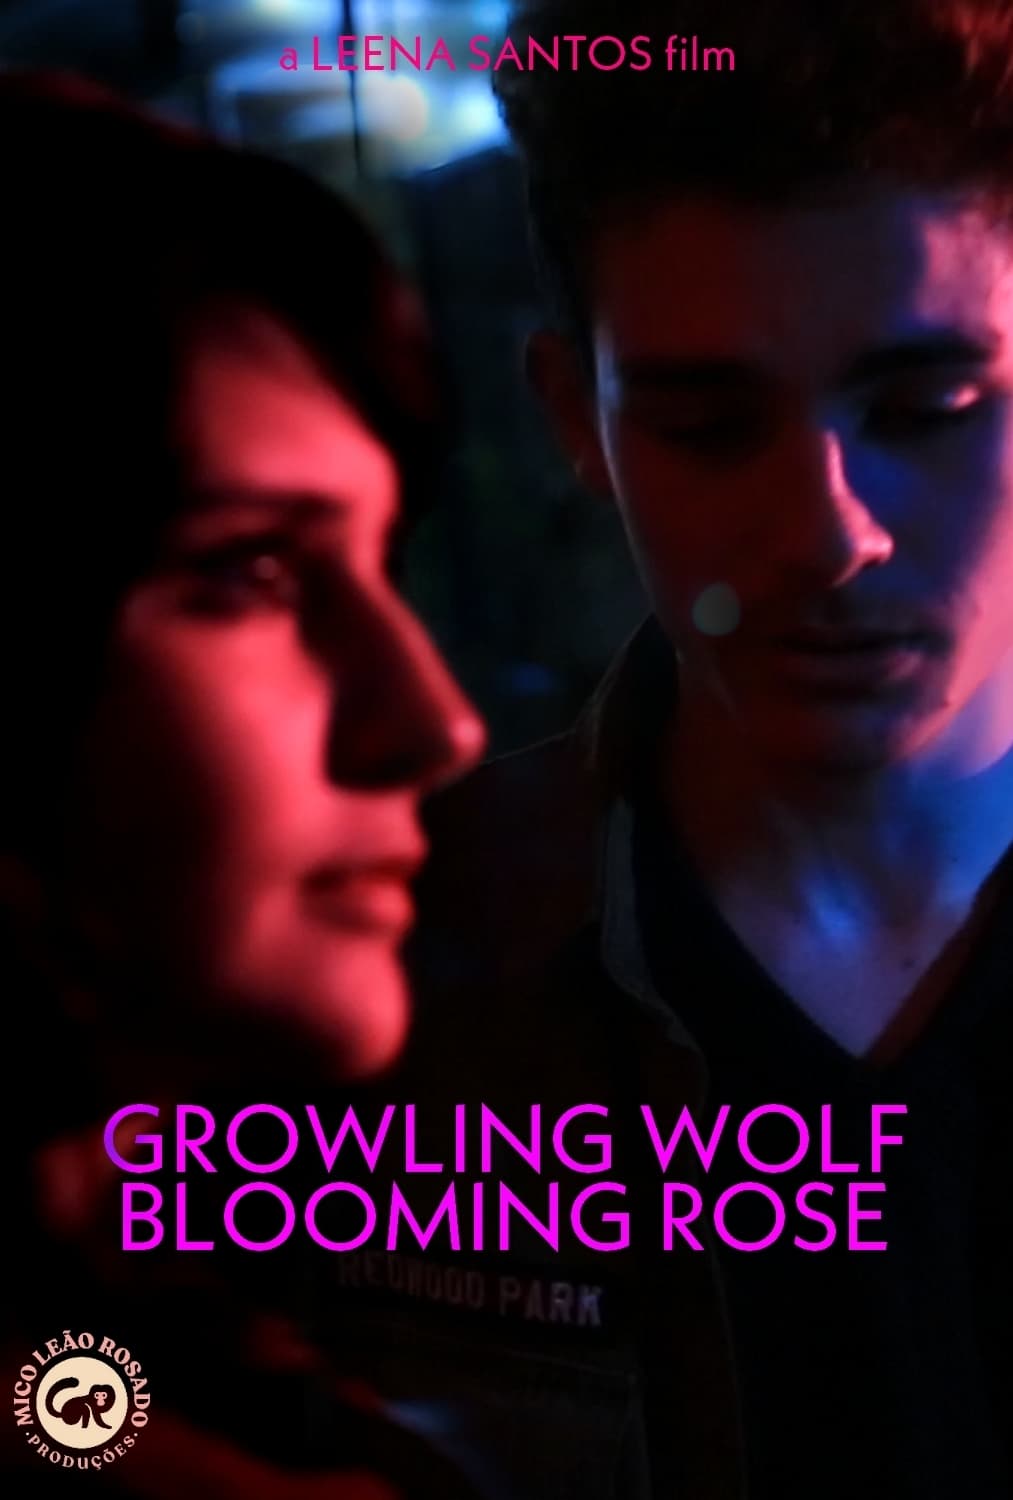 Growling Wolf, Blooming Rose